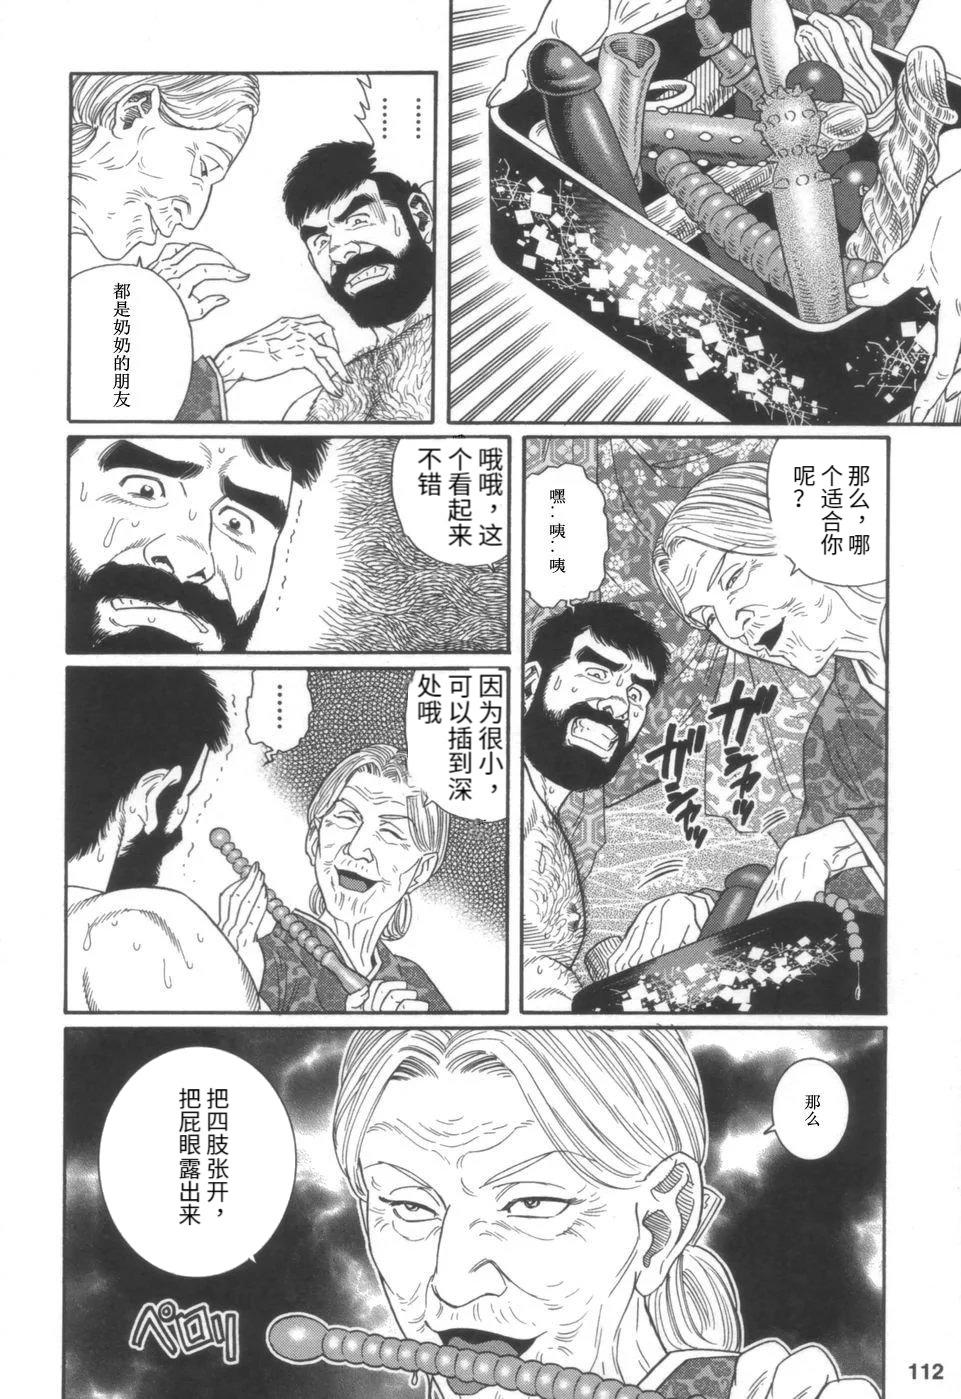 Cfnm Gedou no Ie Joukan | 邪道之家 Vol. 1 Ch.4 Balls - Page 6